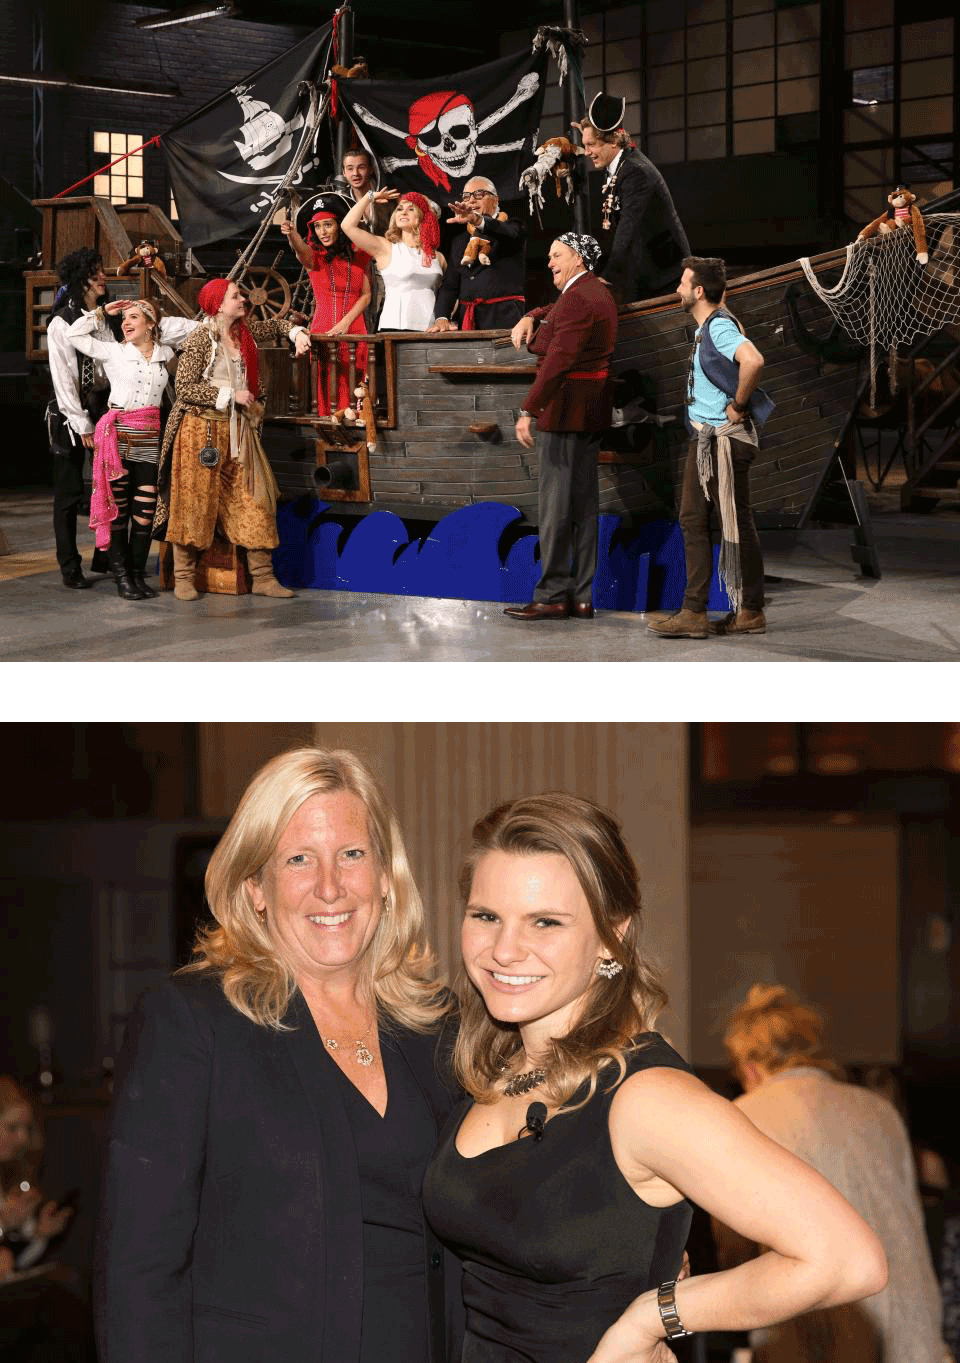 Top: Michele salutes and her fellow Dragons get into the act when a Toronto entrepreneur pitched his pirate-themed theatre and cruise on Episode 18 of Season 10 of Dragons' Den. Bottom: Michele with one of her Queen’s mentors, Elspeth Murray, Associate Dean, MBA and Masters Programs, at a Women of Influence Evening Series event that Michele headlined with fellow Dragon Manjit Minhas. Elspeth introduced Michele to the capacity audience of 250 in Toronto in March.